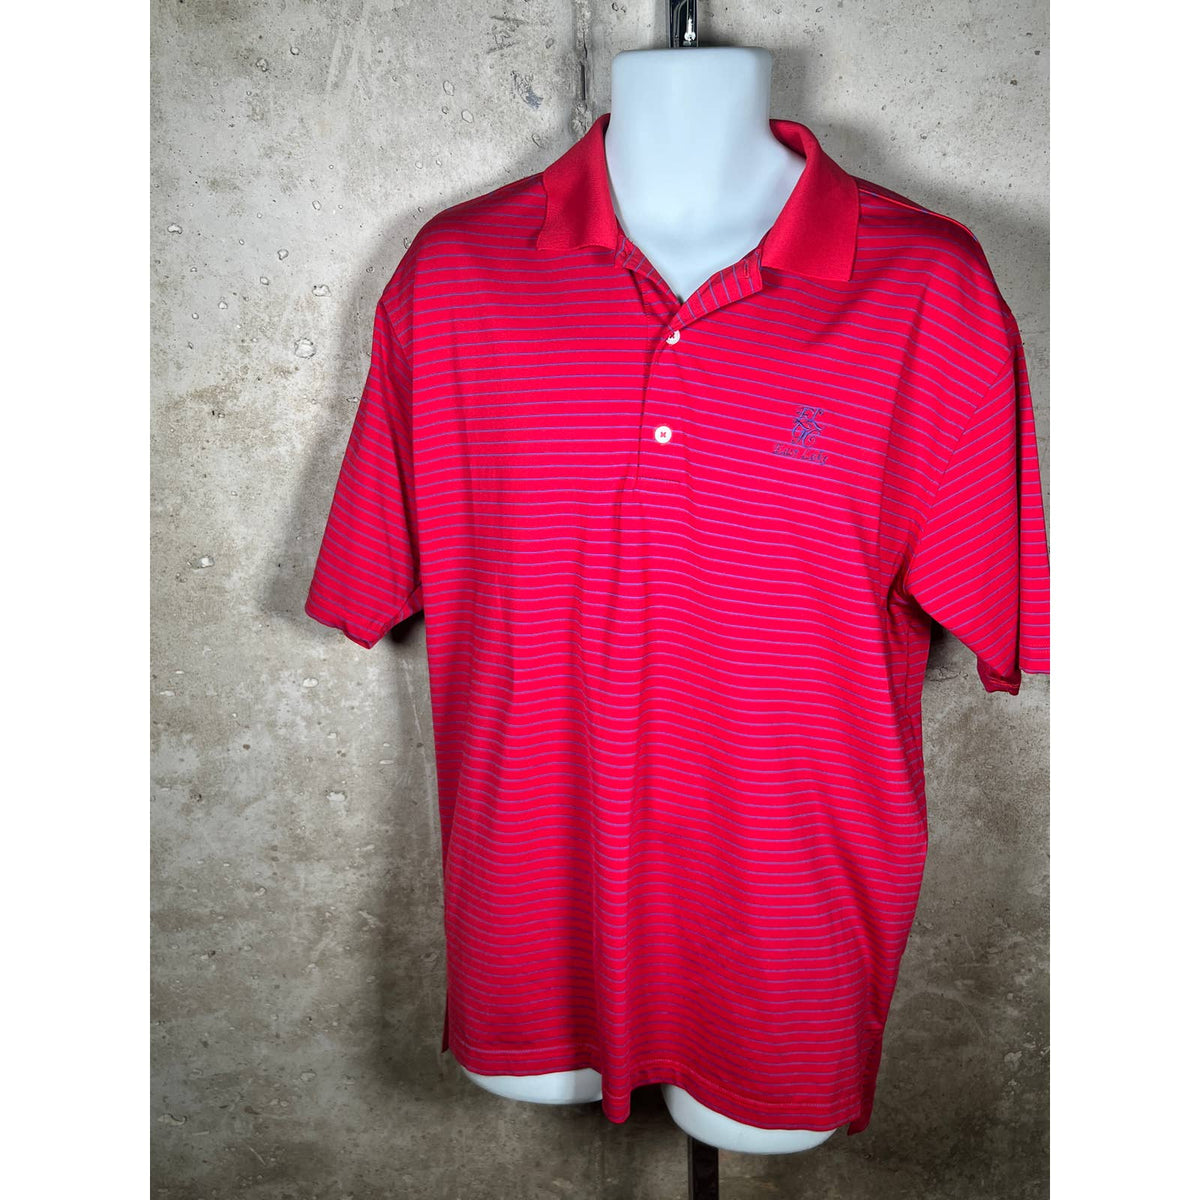 Turtleson Red Tour Performance Striped East Lake Golf Club Polo Sz. Large